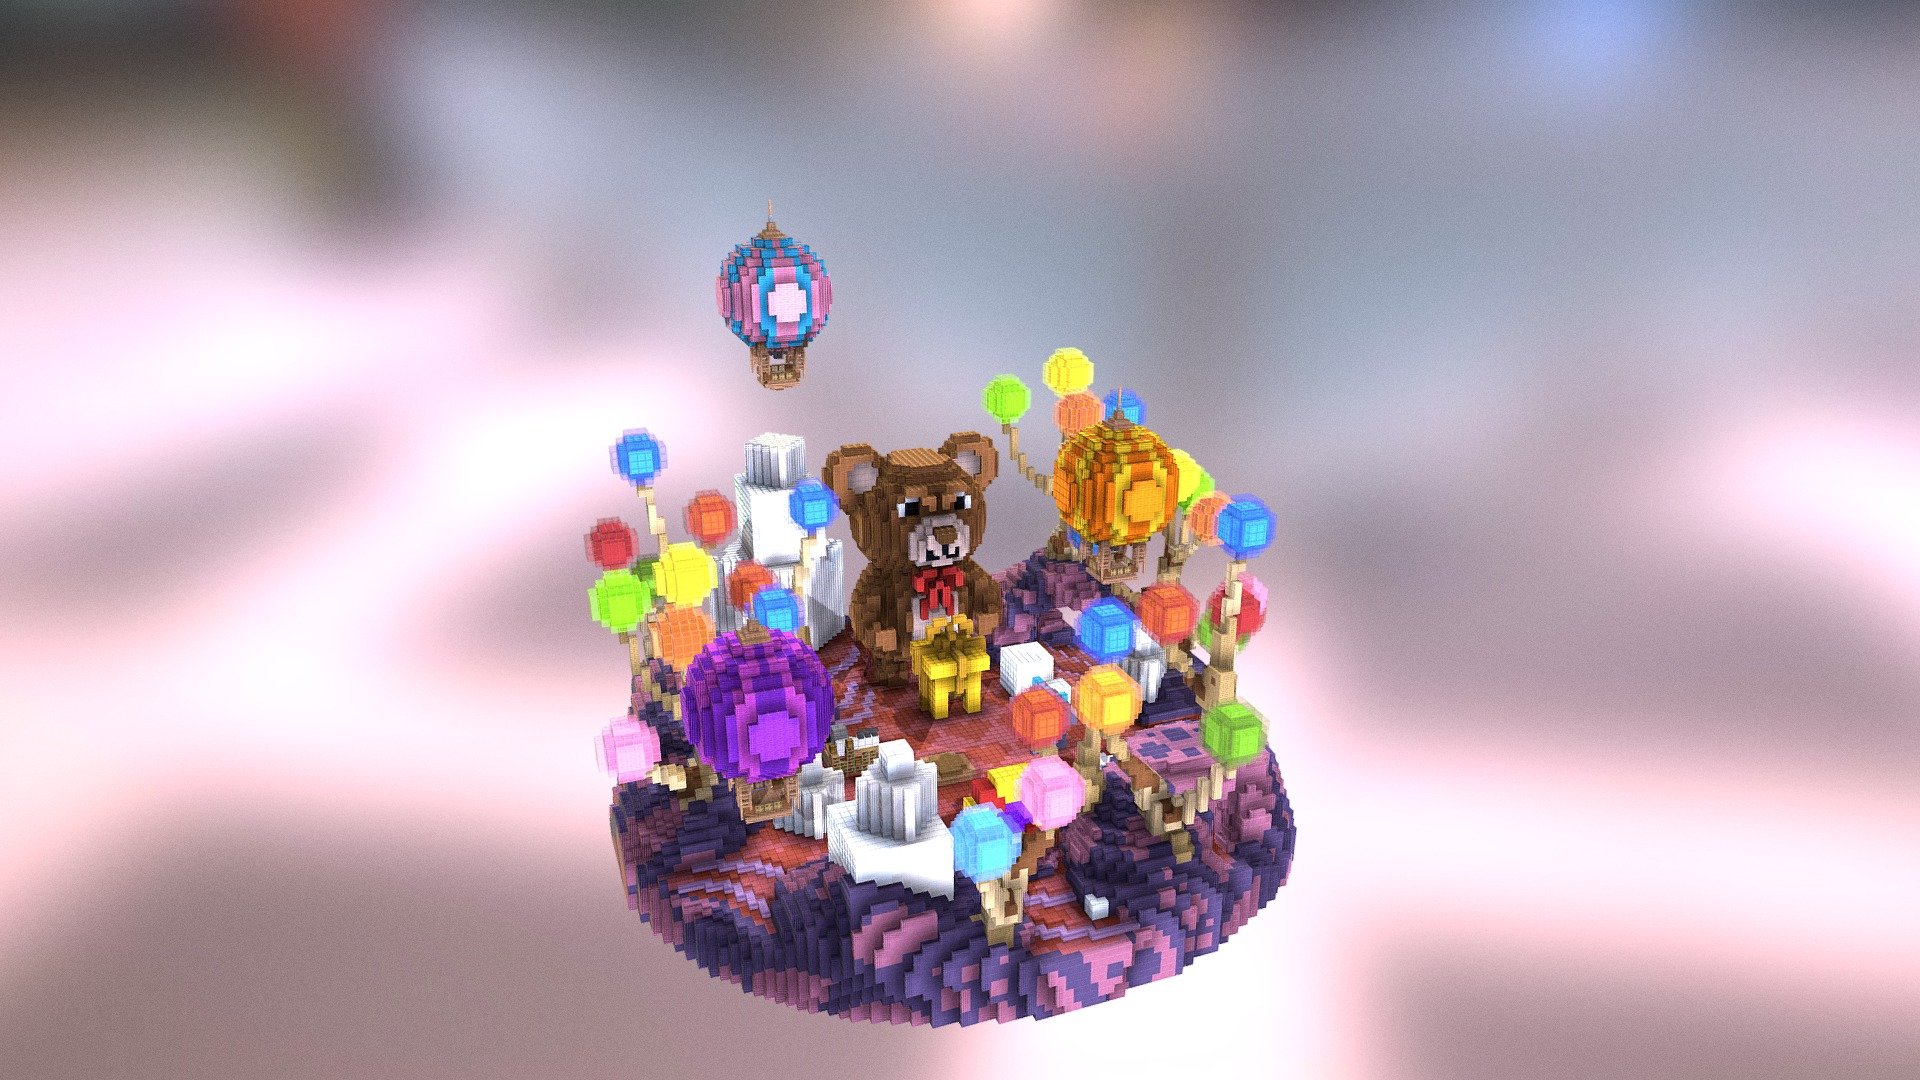 Candy compact Spawn/Lobby
Compact multifunctional Spawn/Lobby and for any server !
This map include: a spawn point, a 2 place for the chests/case, 1 NPC place, shop, portal, info stand, enchanting and repair place.

See sketchfab 3D Model before purchase! map was created for servers 1.8 and higher! If you have questions, write to us CreativeDucks#8951, quack quack … - Candy compact Spawn/Lobby - 3D model by CreativeDucks (@BuildingDucks) 3d model